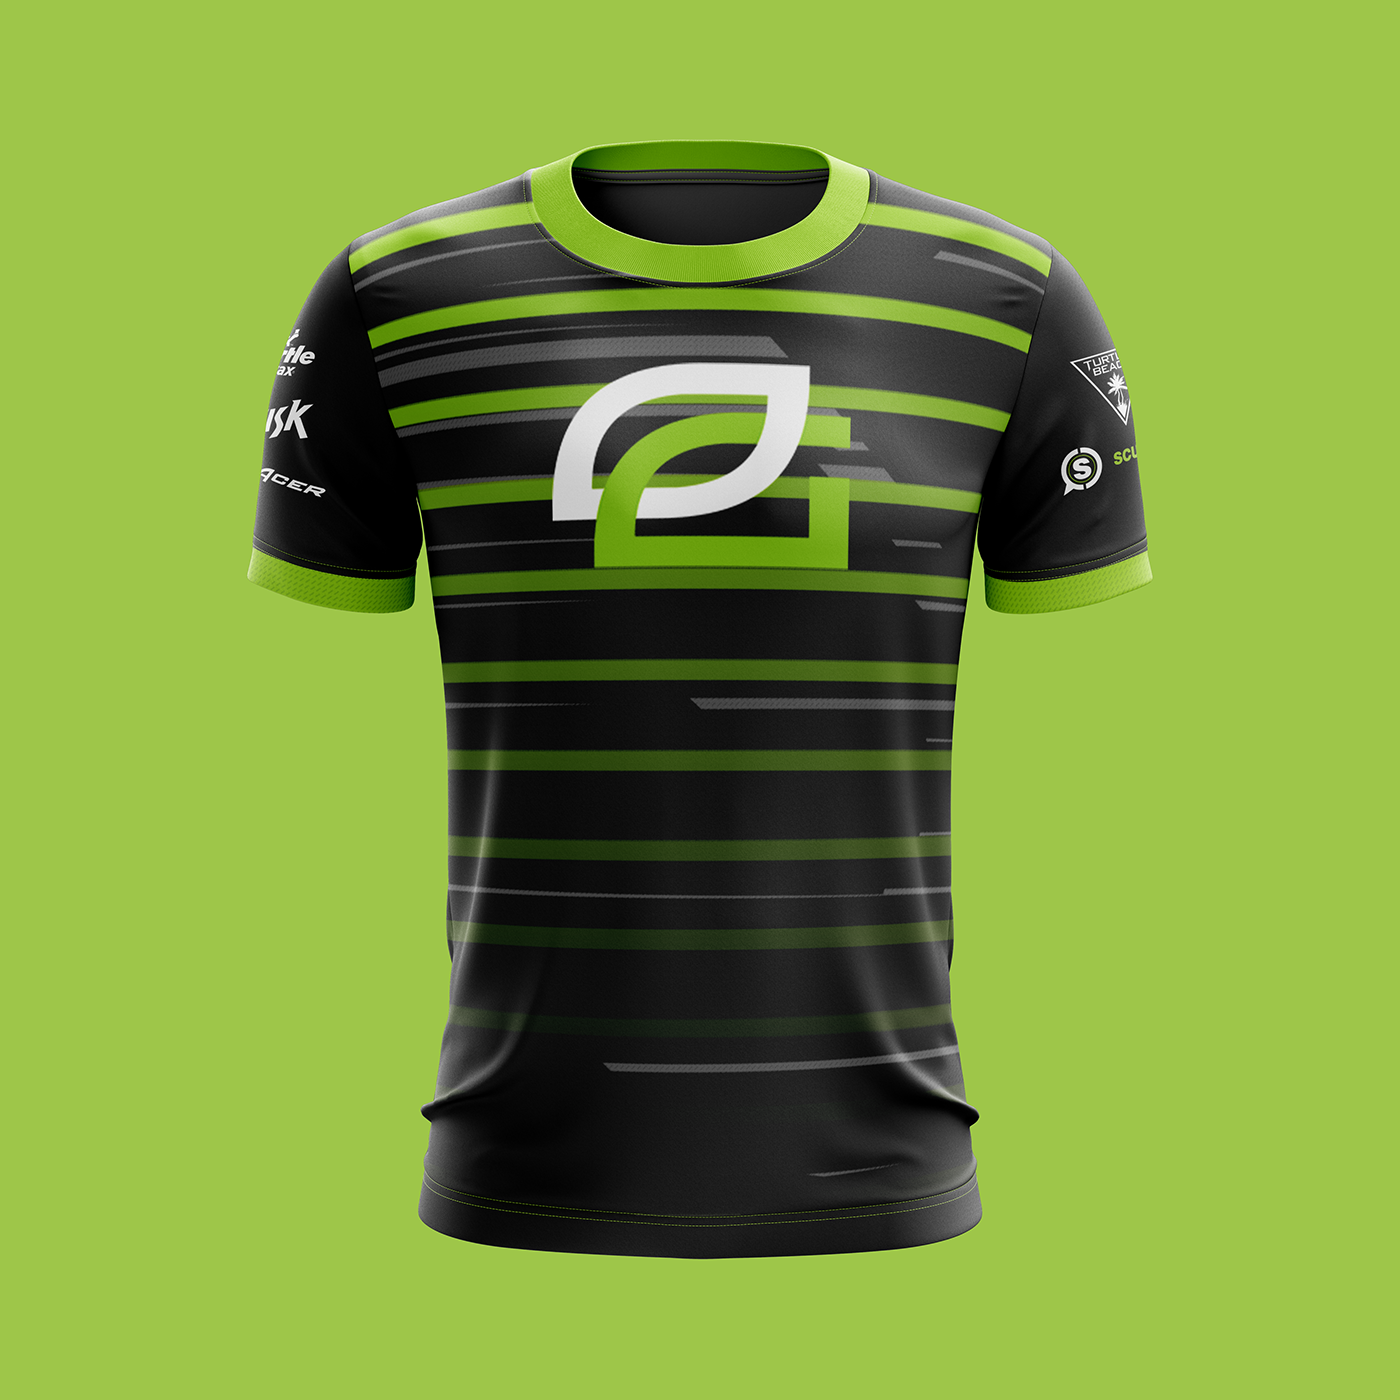 Download Esports Jersey Mockups on Behance